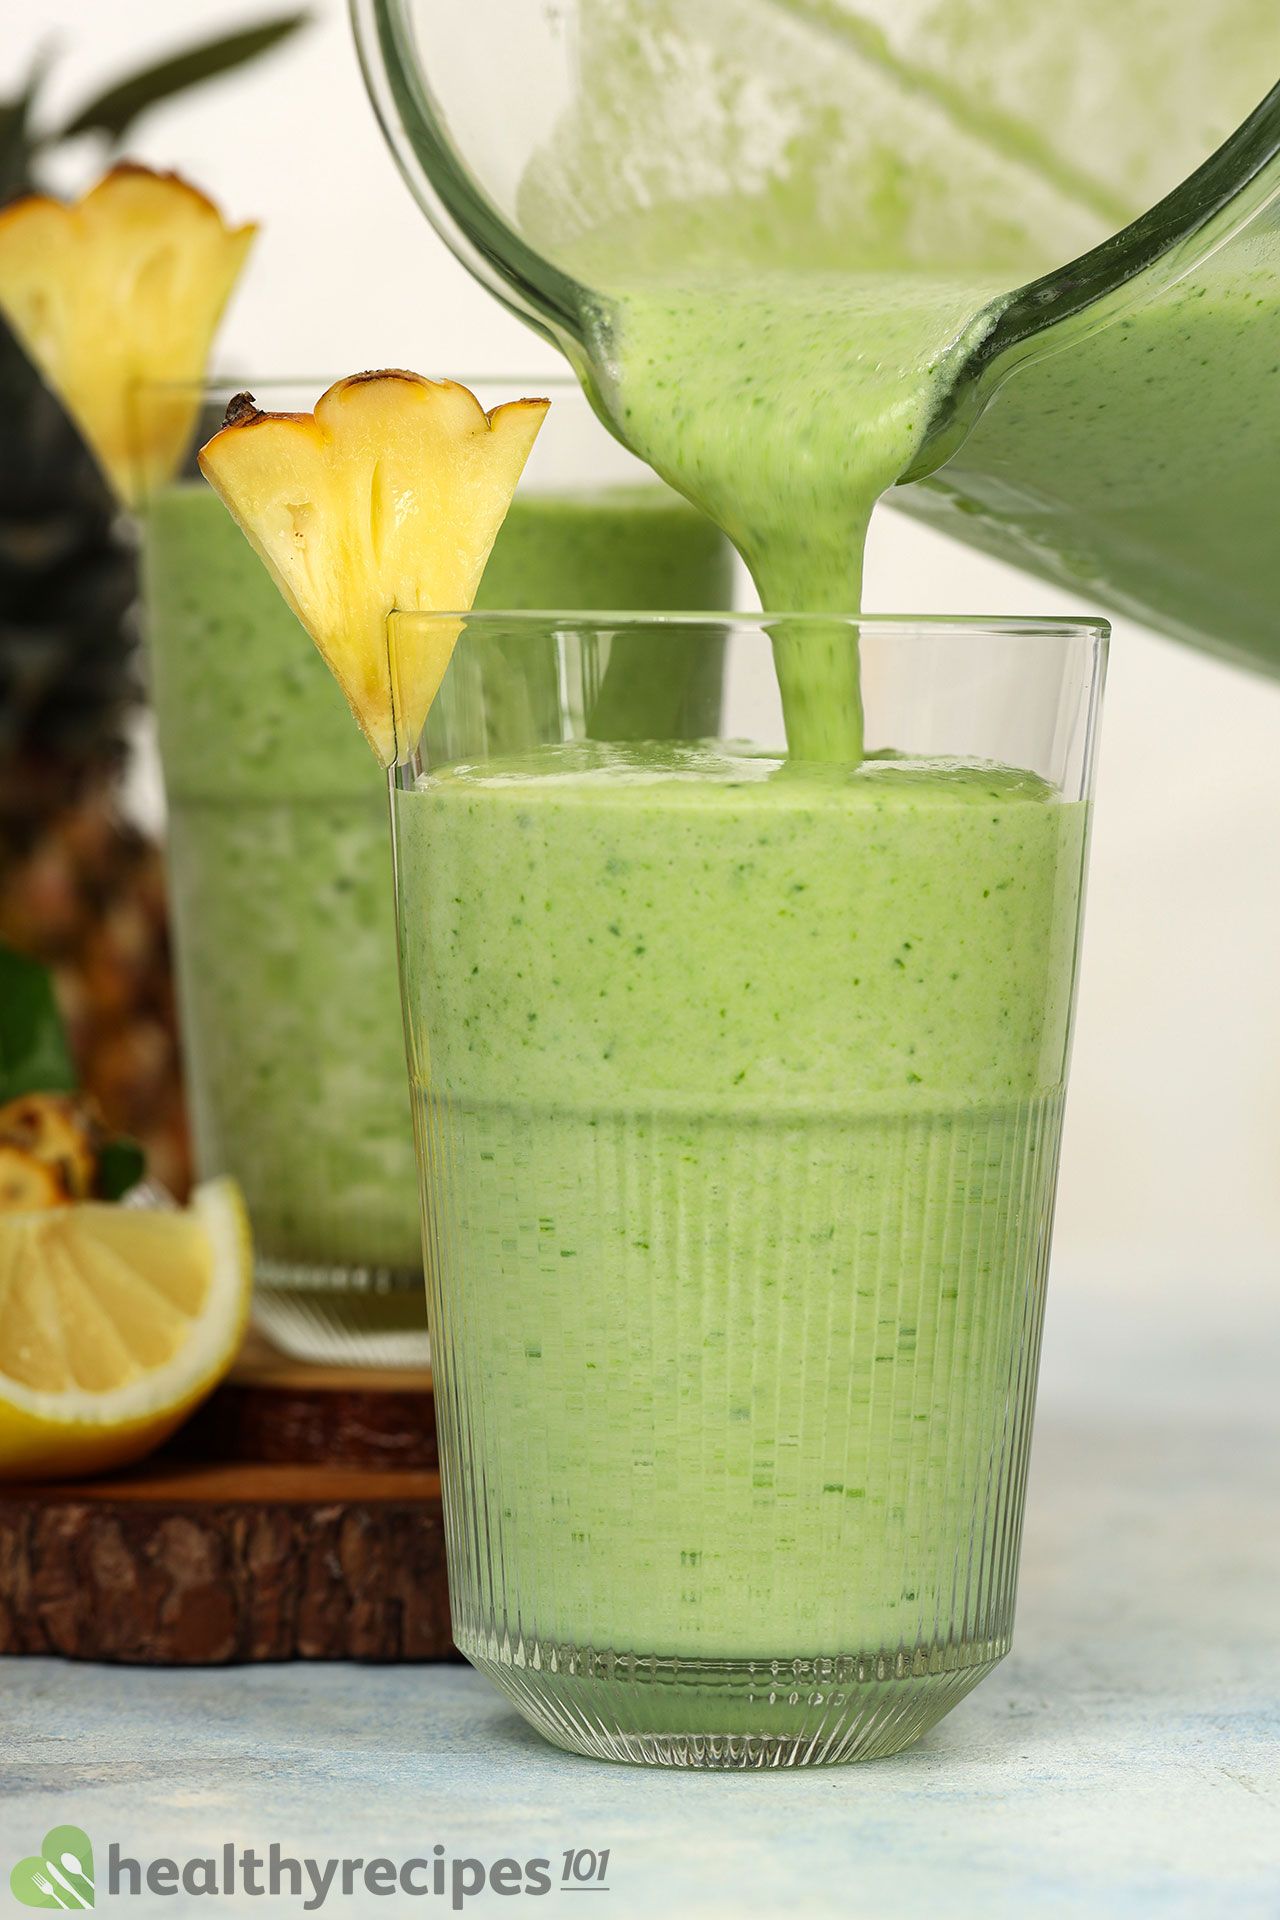 Is This Spinach Green Smoothie Recipe Healthy